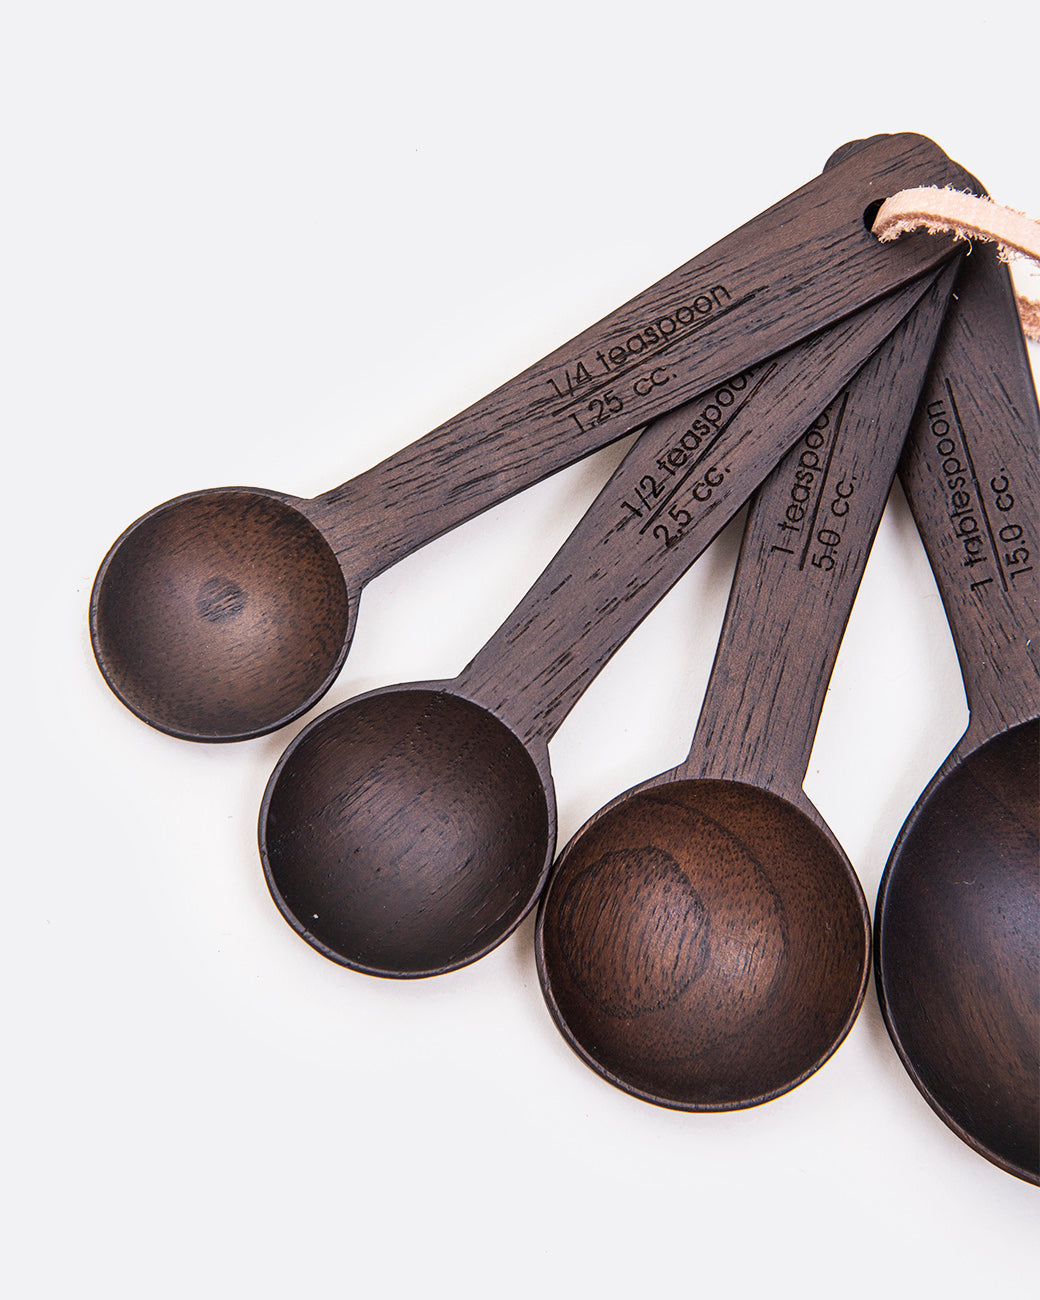 above view of dark wood measuring spoons side by side with the writing etched into the handles